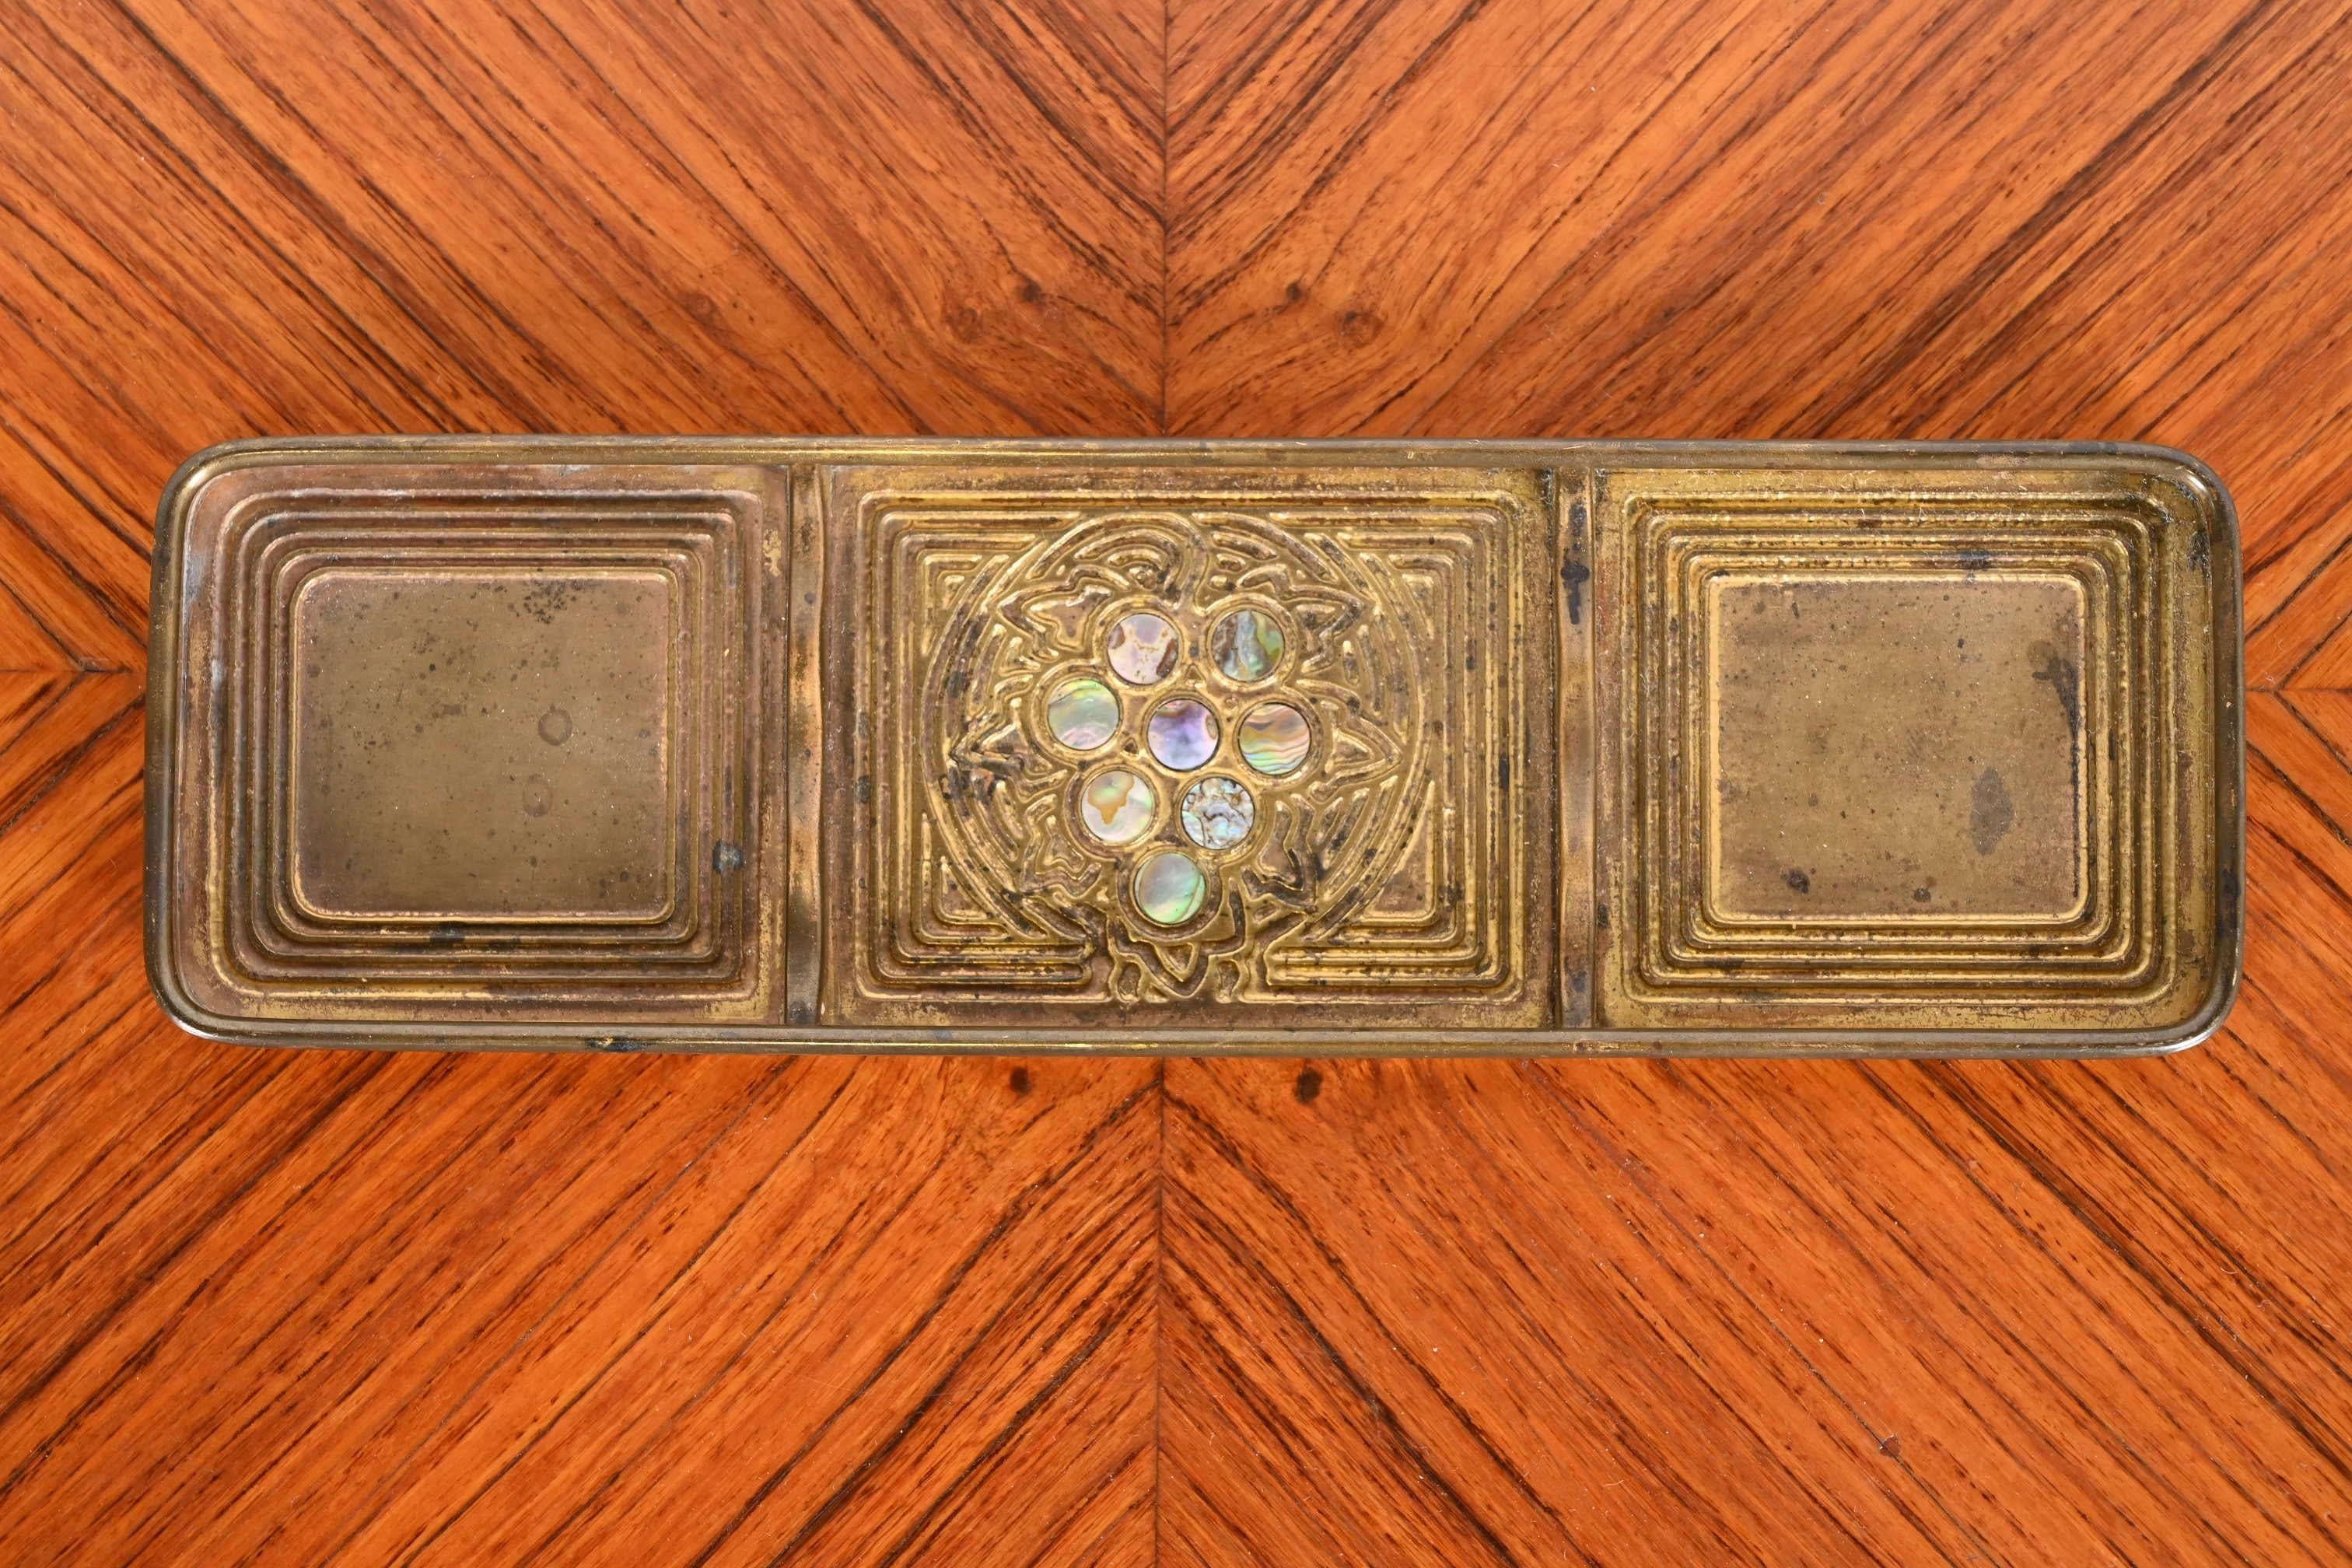 A gorgeous Art Deco period bronze doré and inlaid abalone pen tray

By Tiffany Studios

New York, USA, early 20th century

Measures: 8.75